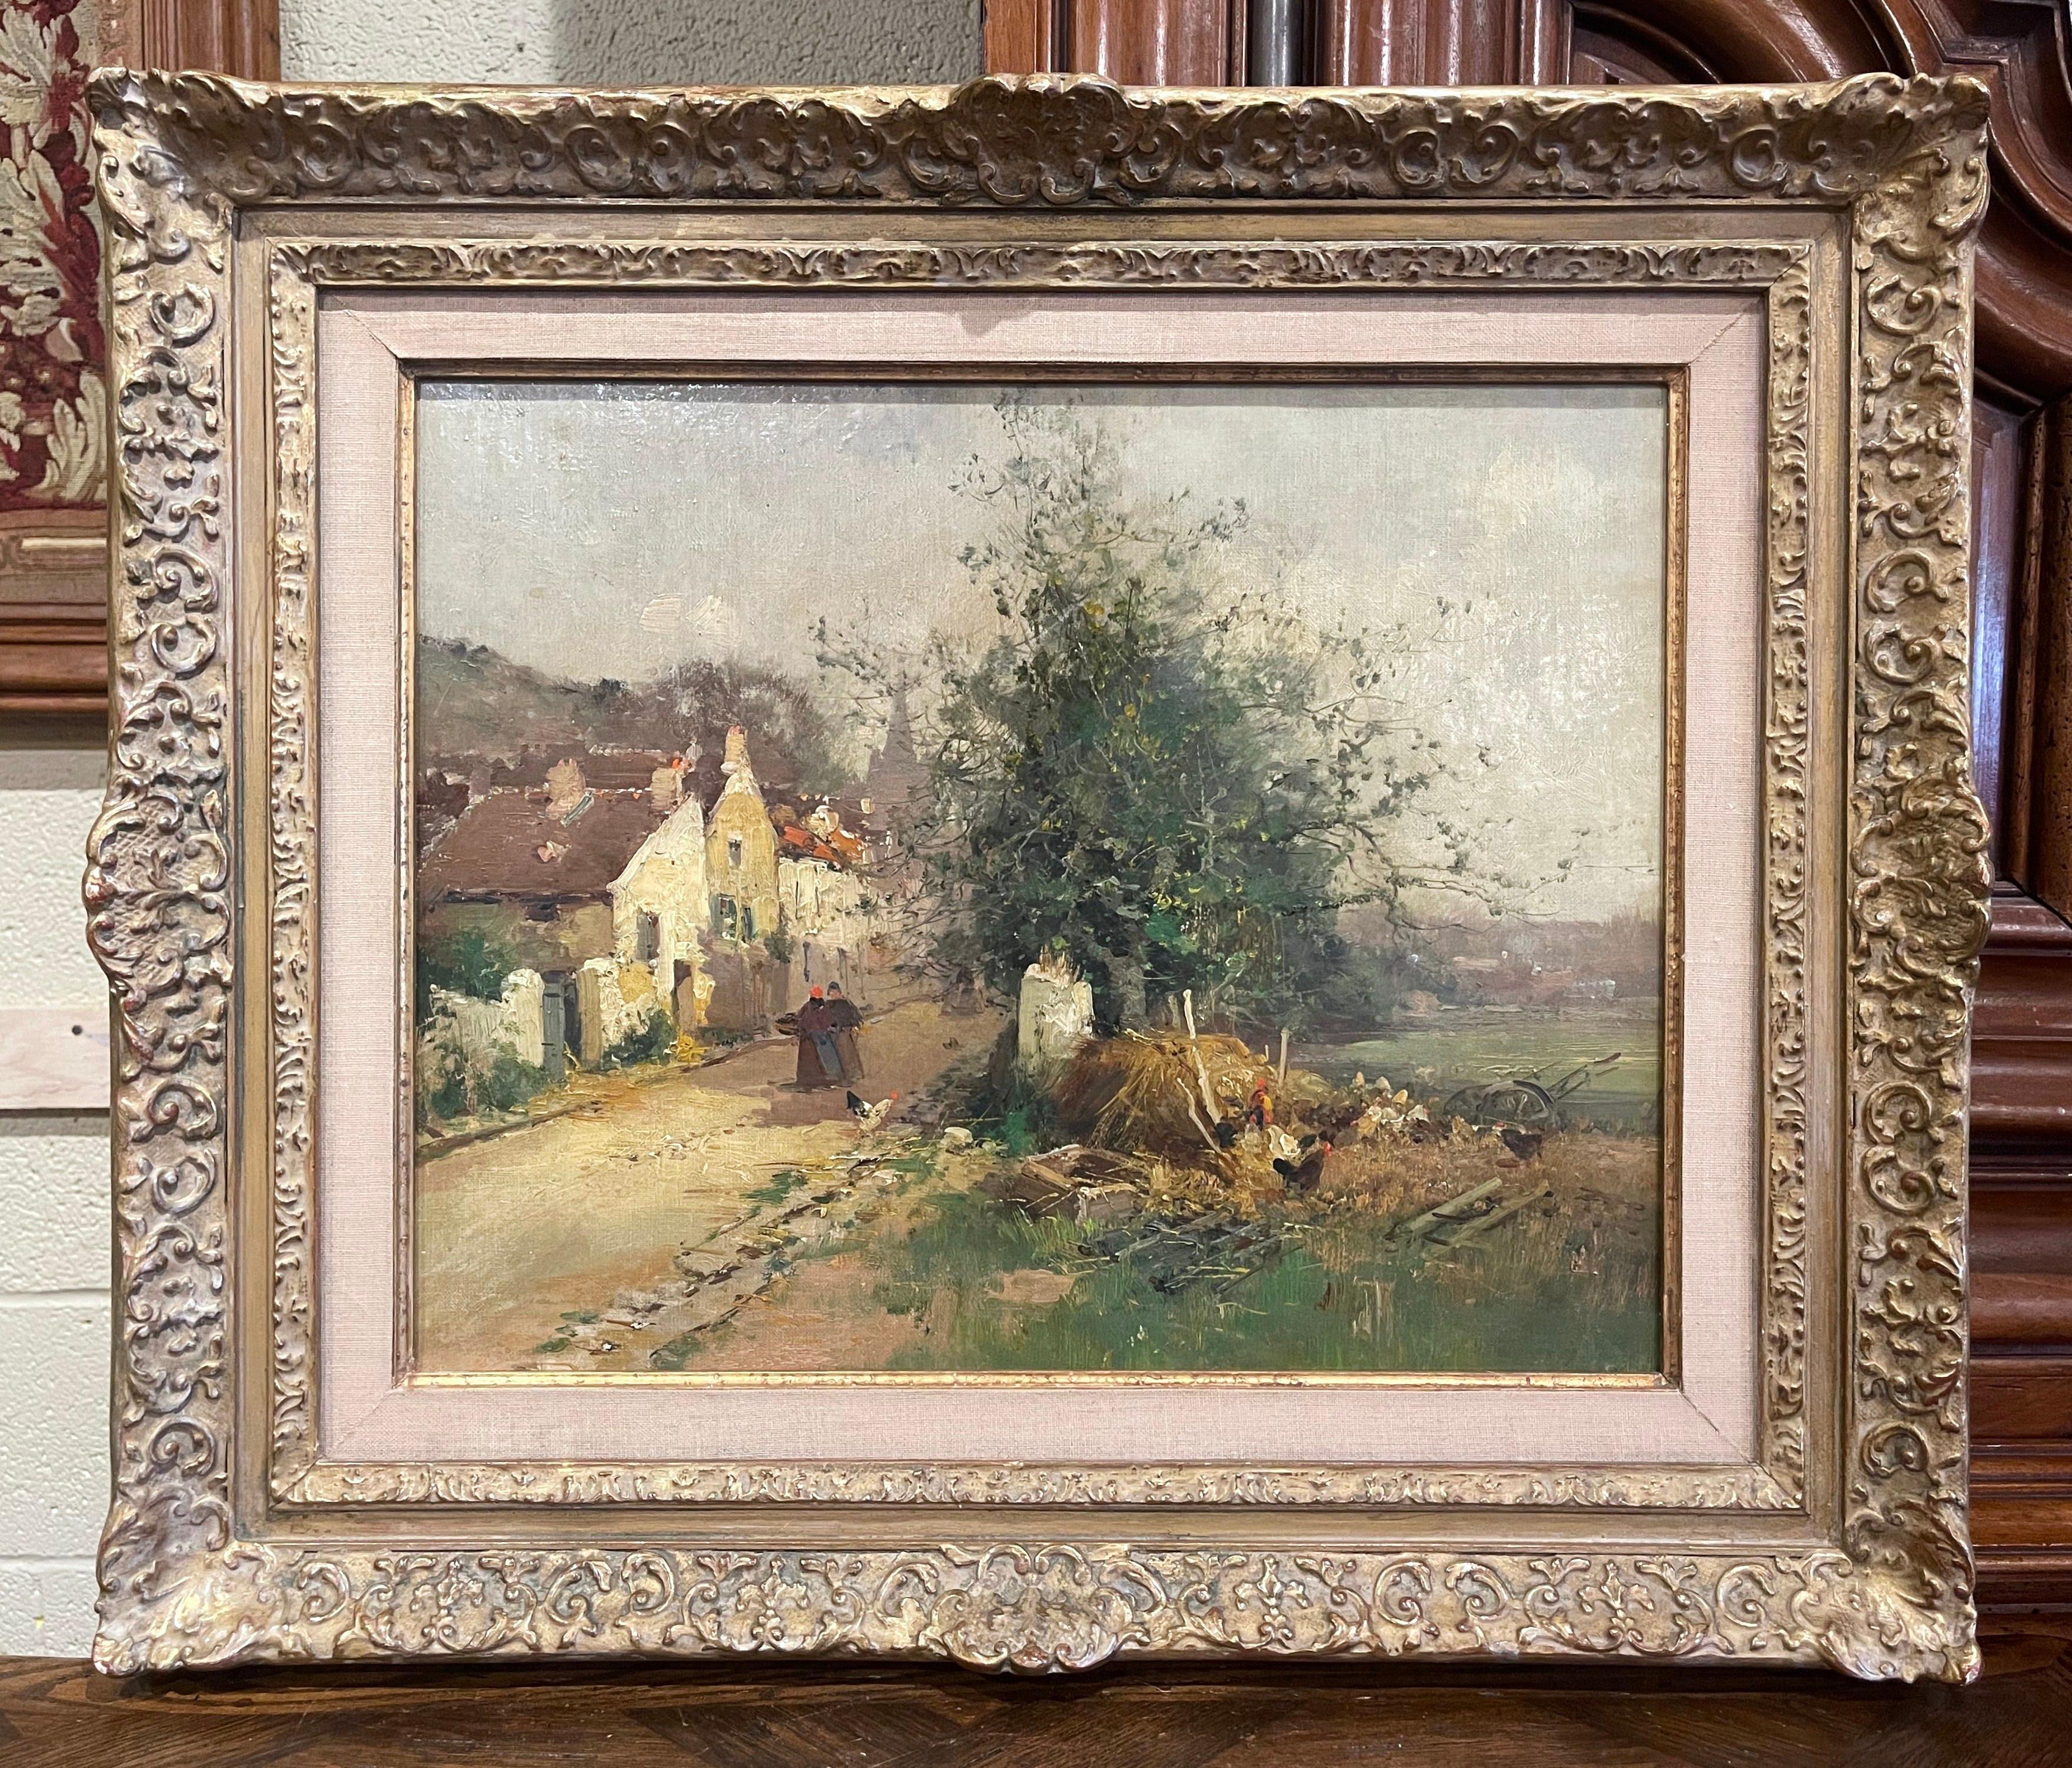 19th Century French Village Oil Painting on Canvas Signed E. Galien-Laloue For Sale 2